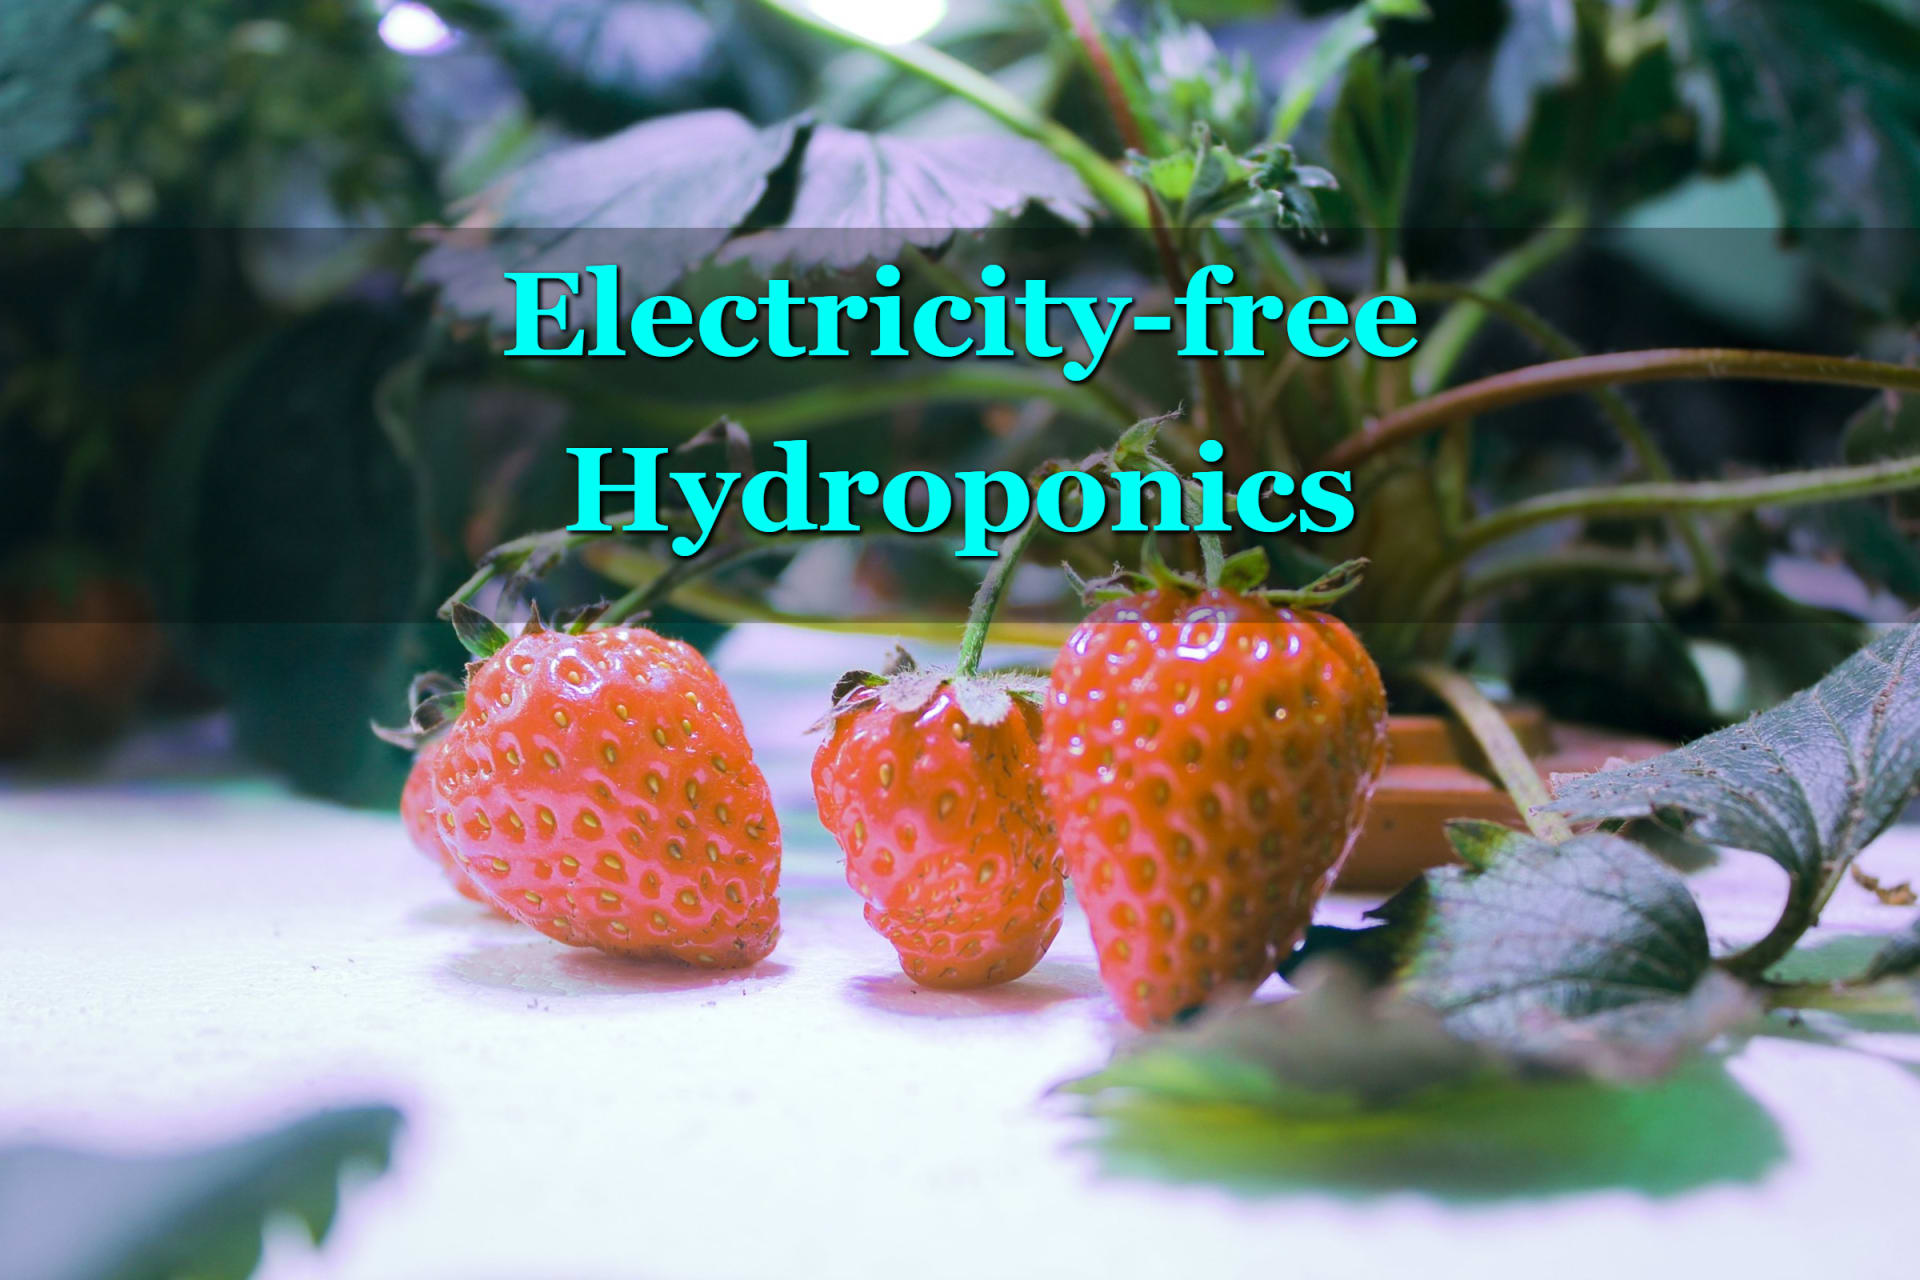 How Do You Make a Hydroponics System Without Electricity?